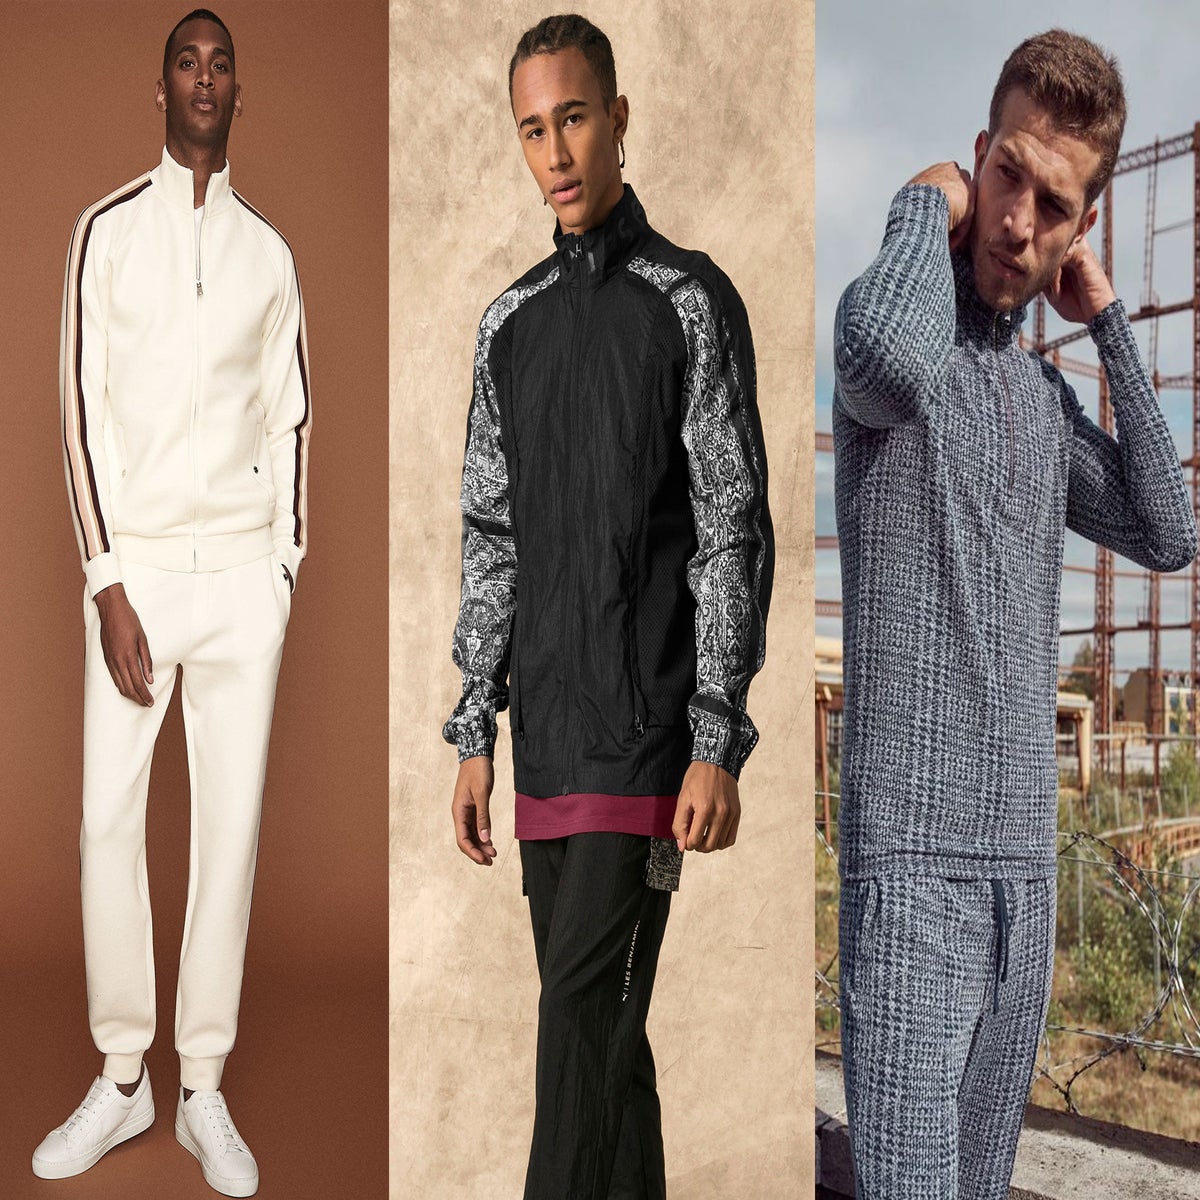 men's tracksuit: Choose from streetwear classics statement sets | The Independent